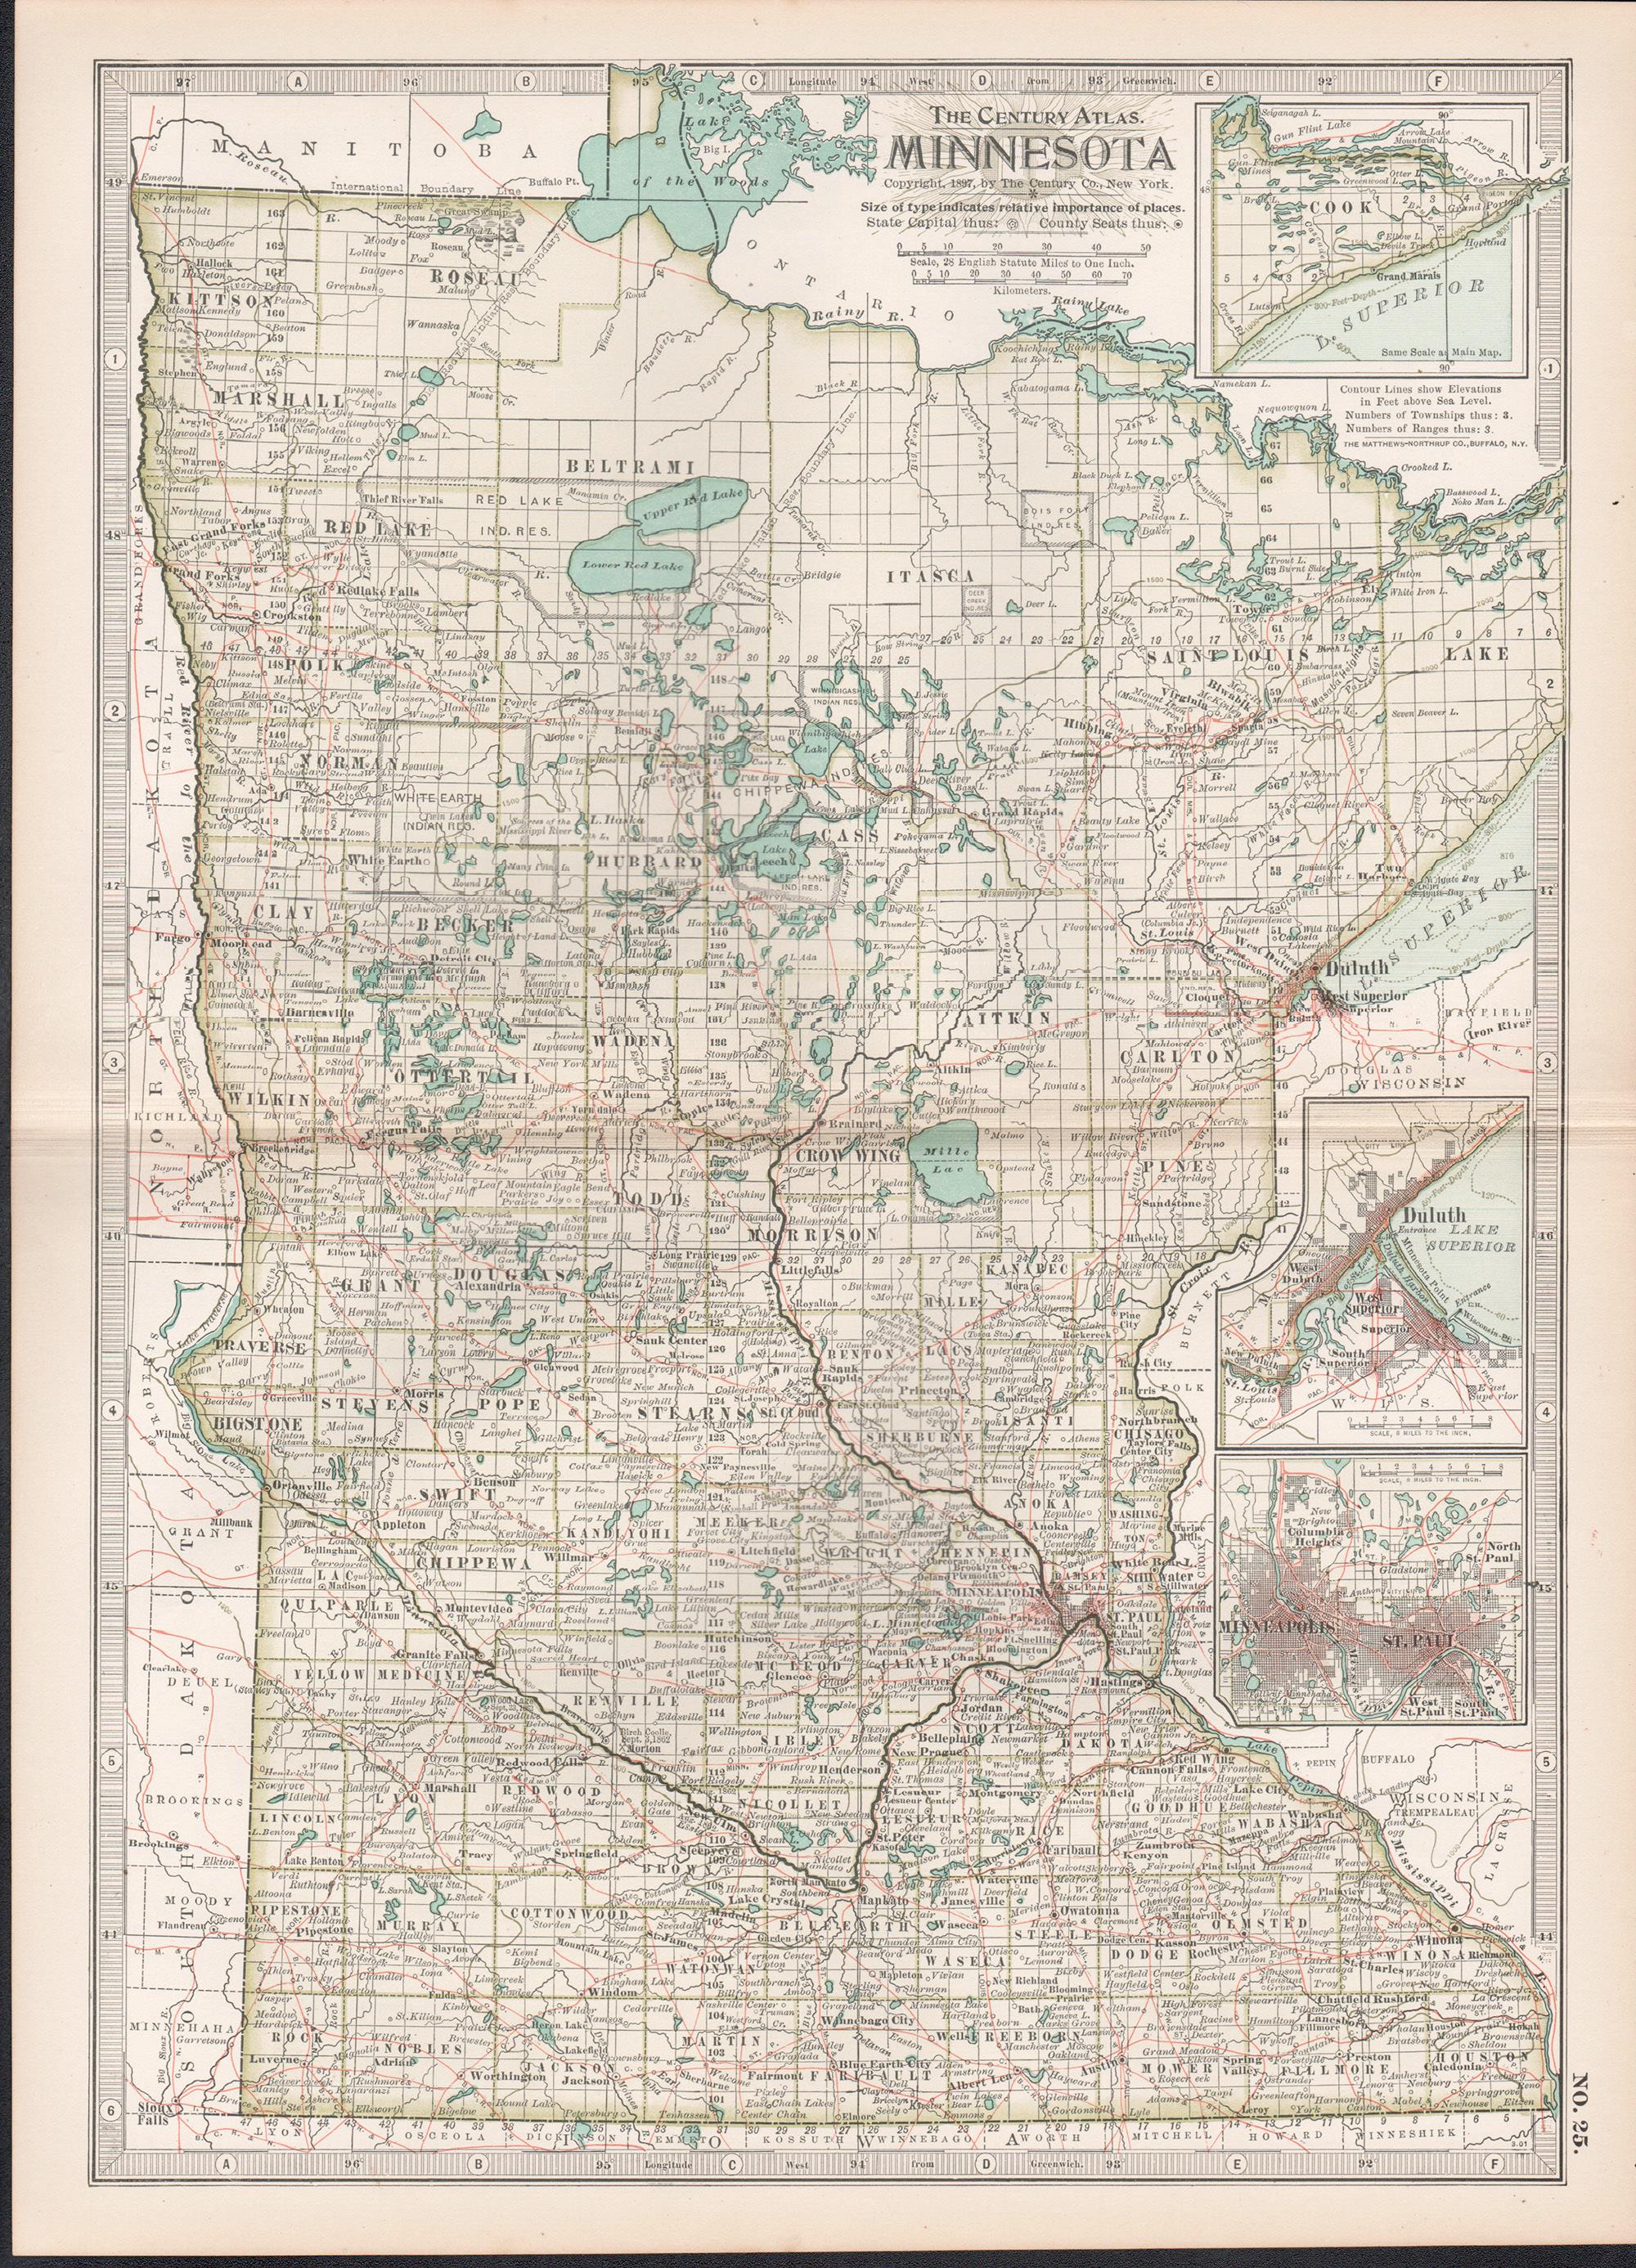 Minnesota. USA. Century Atlas state antique vintage map - Print by Unknown